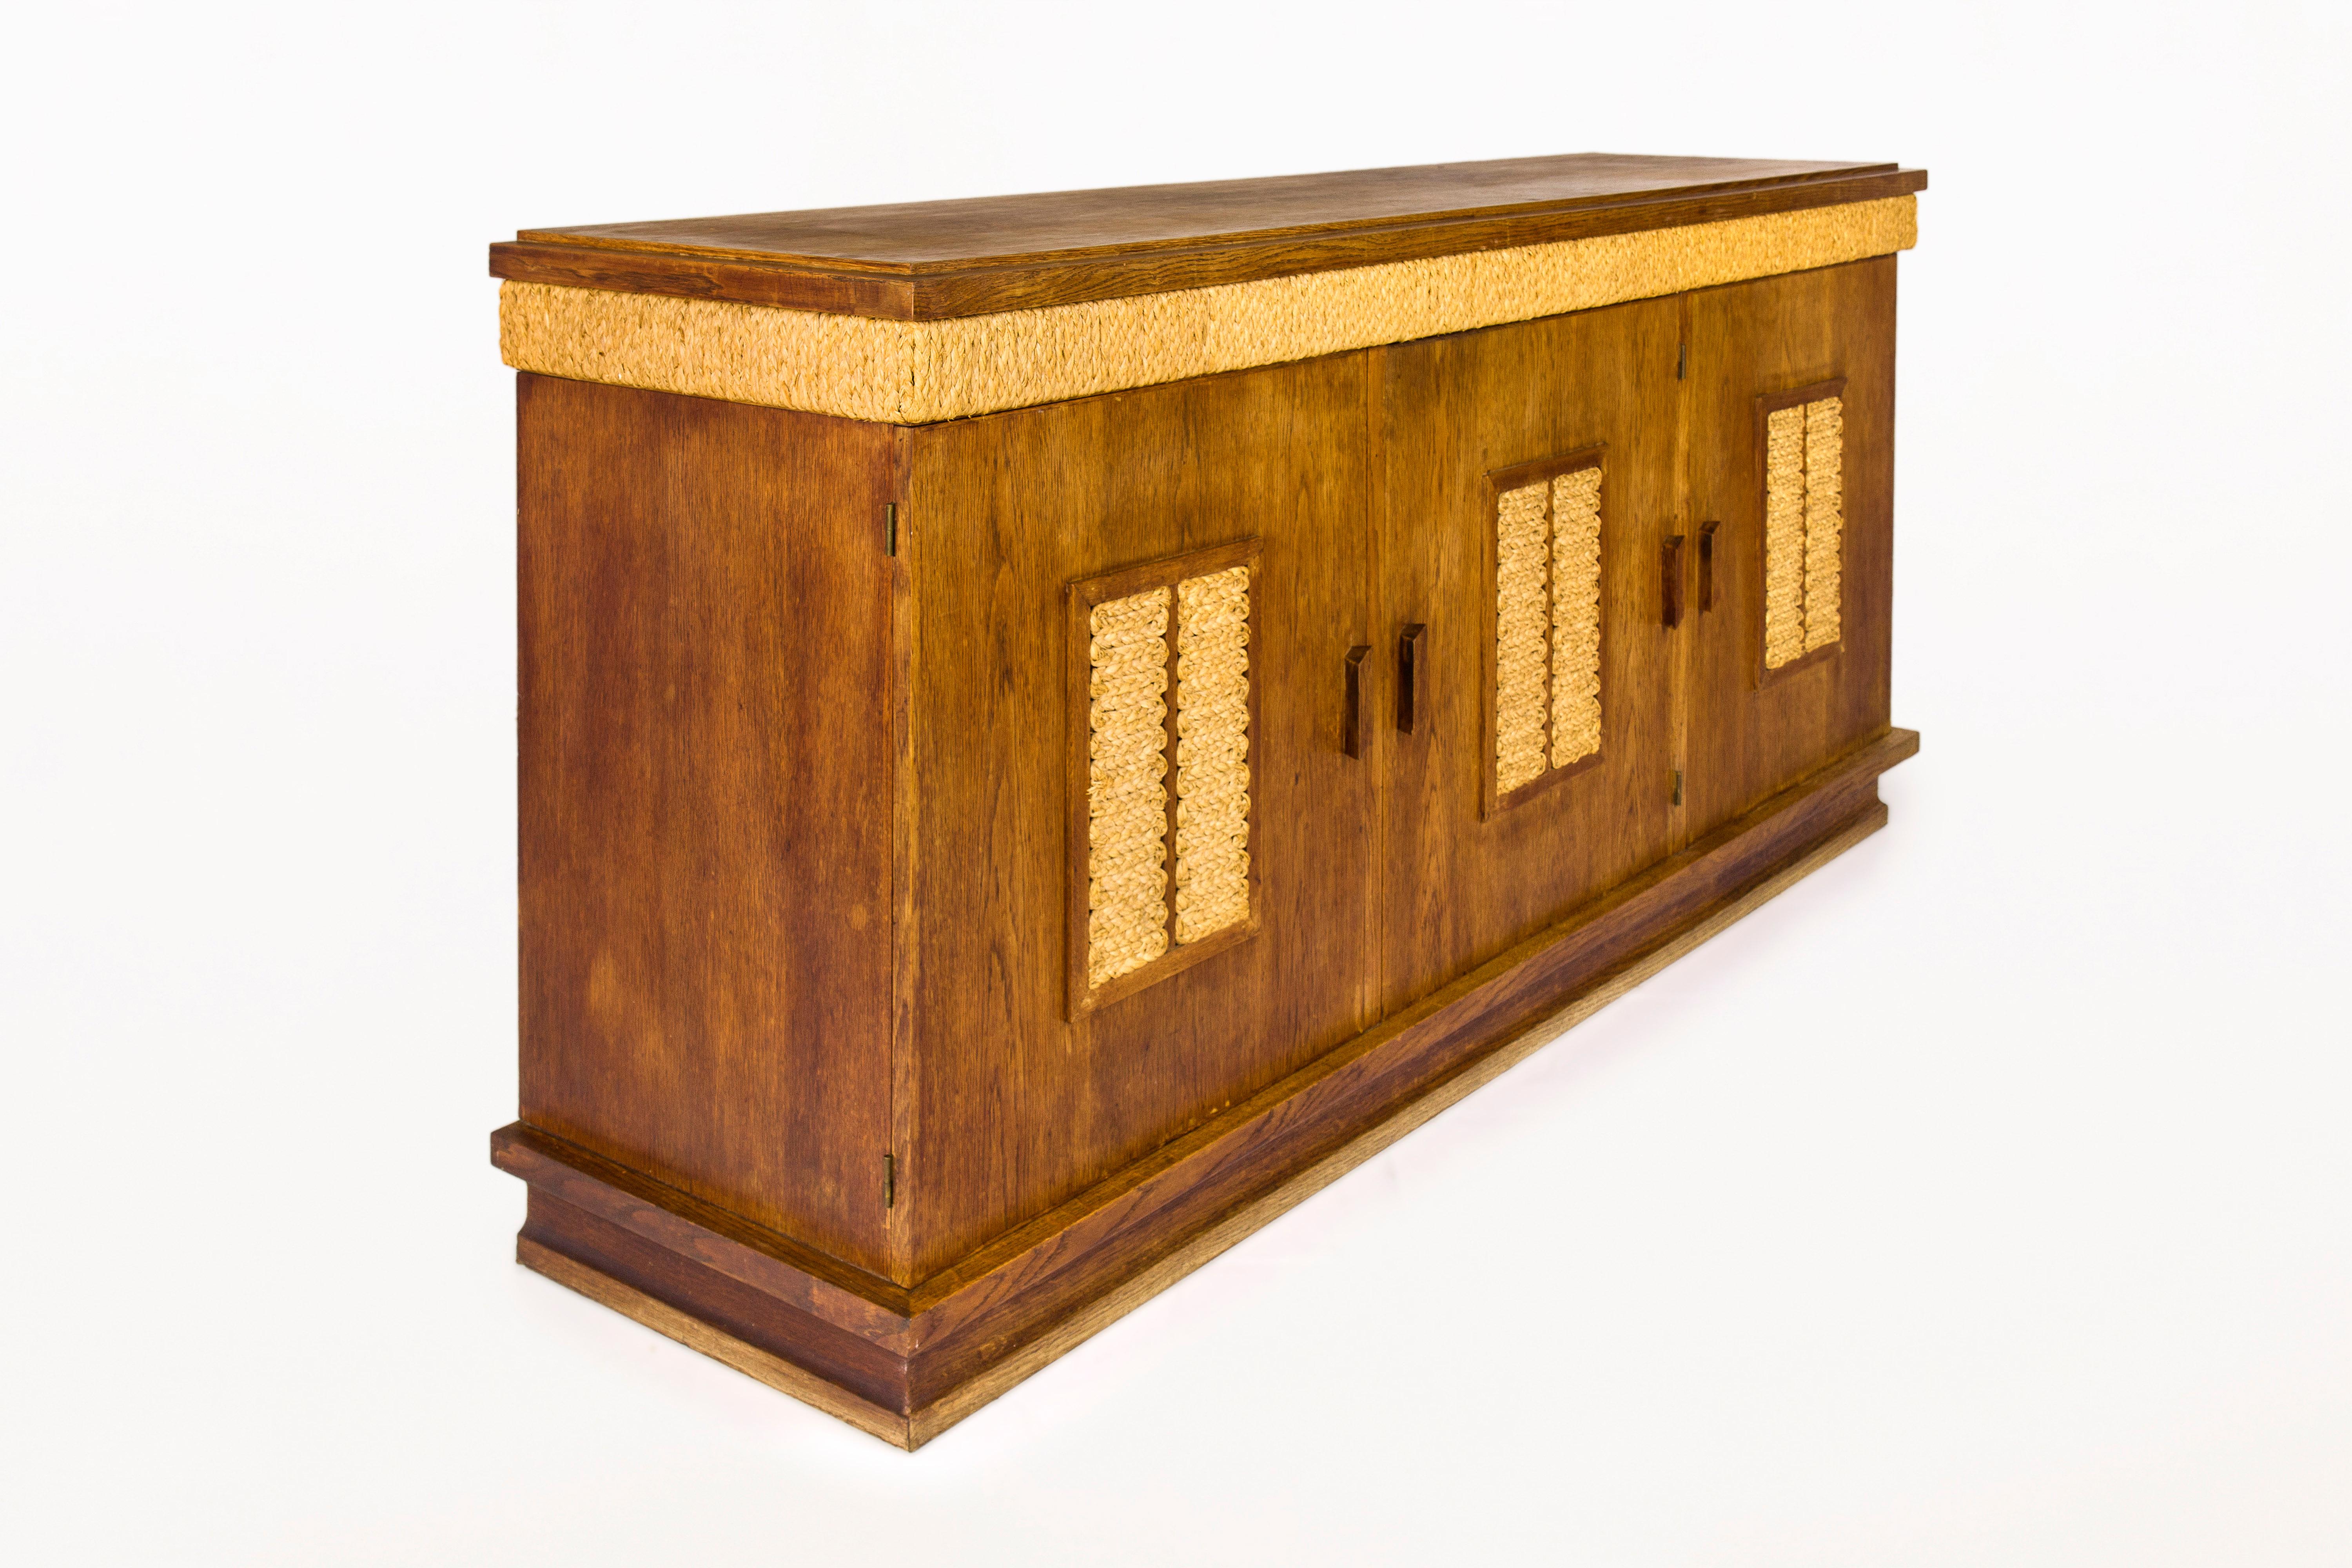 Adrien Audoux & Frida Minet sideboard.
Rope detailing.
Oak top.
3 door sideboard, with central interior drawers
circa 1950, France.
Very good vintage vondition.
Adrien Audoux and Frida Minet were a French couple and worked as designer.
During